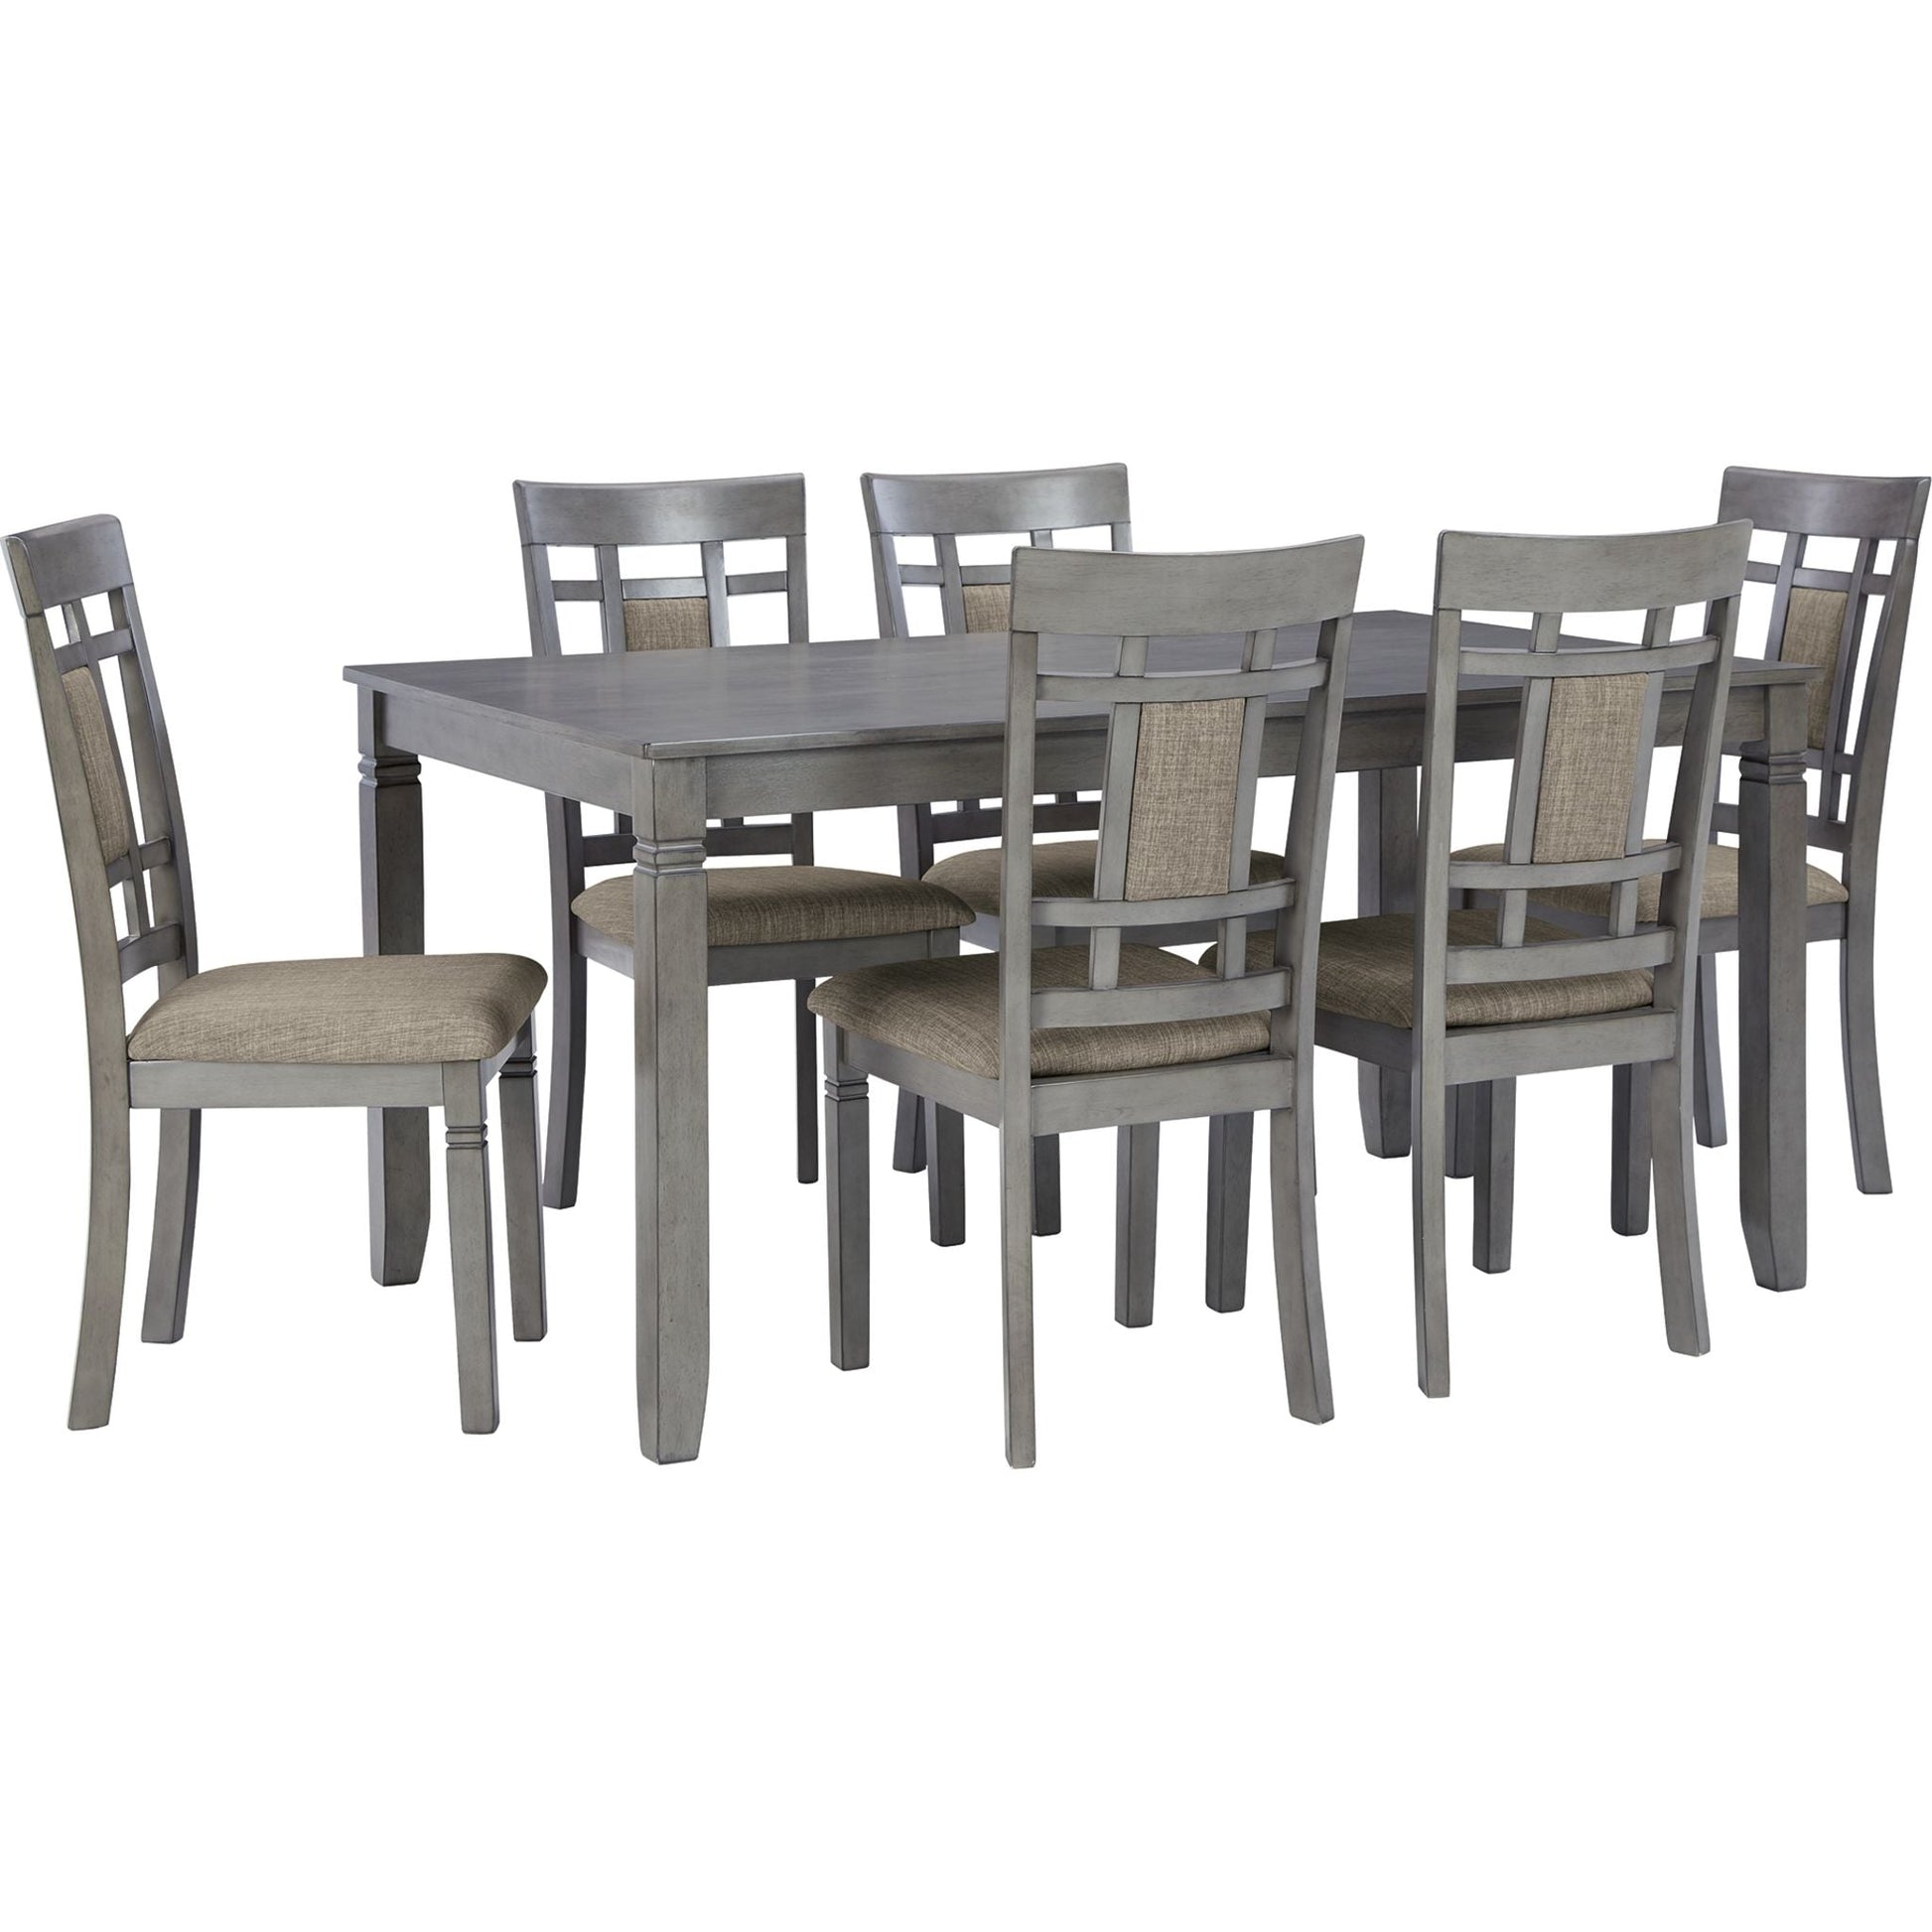 Jayemyer 7 Piece Casual Dining - Charcoal Gray - (D368-425)